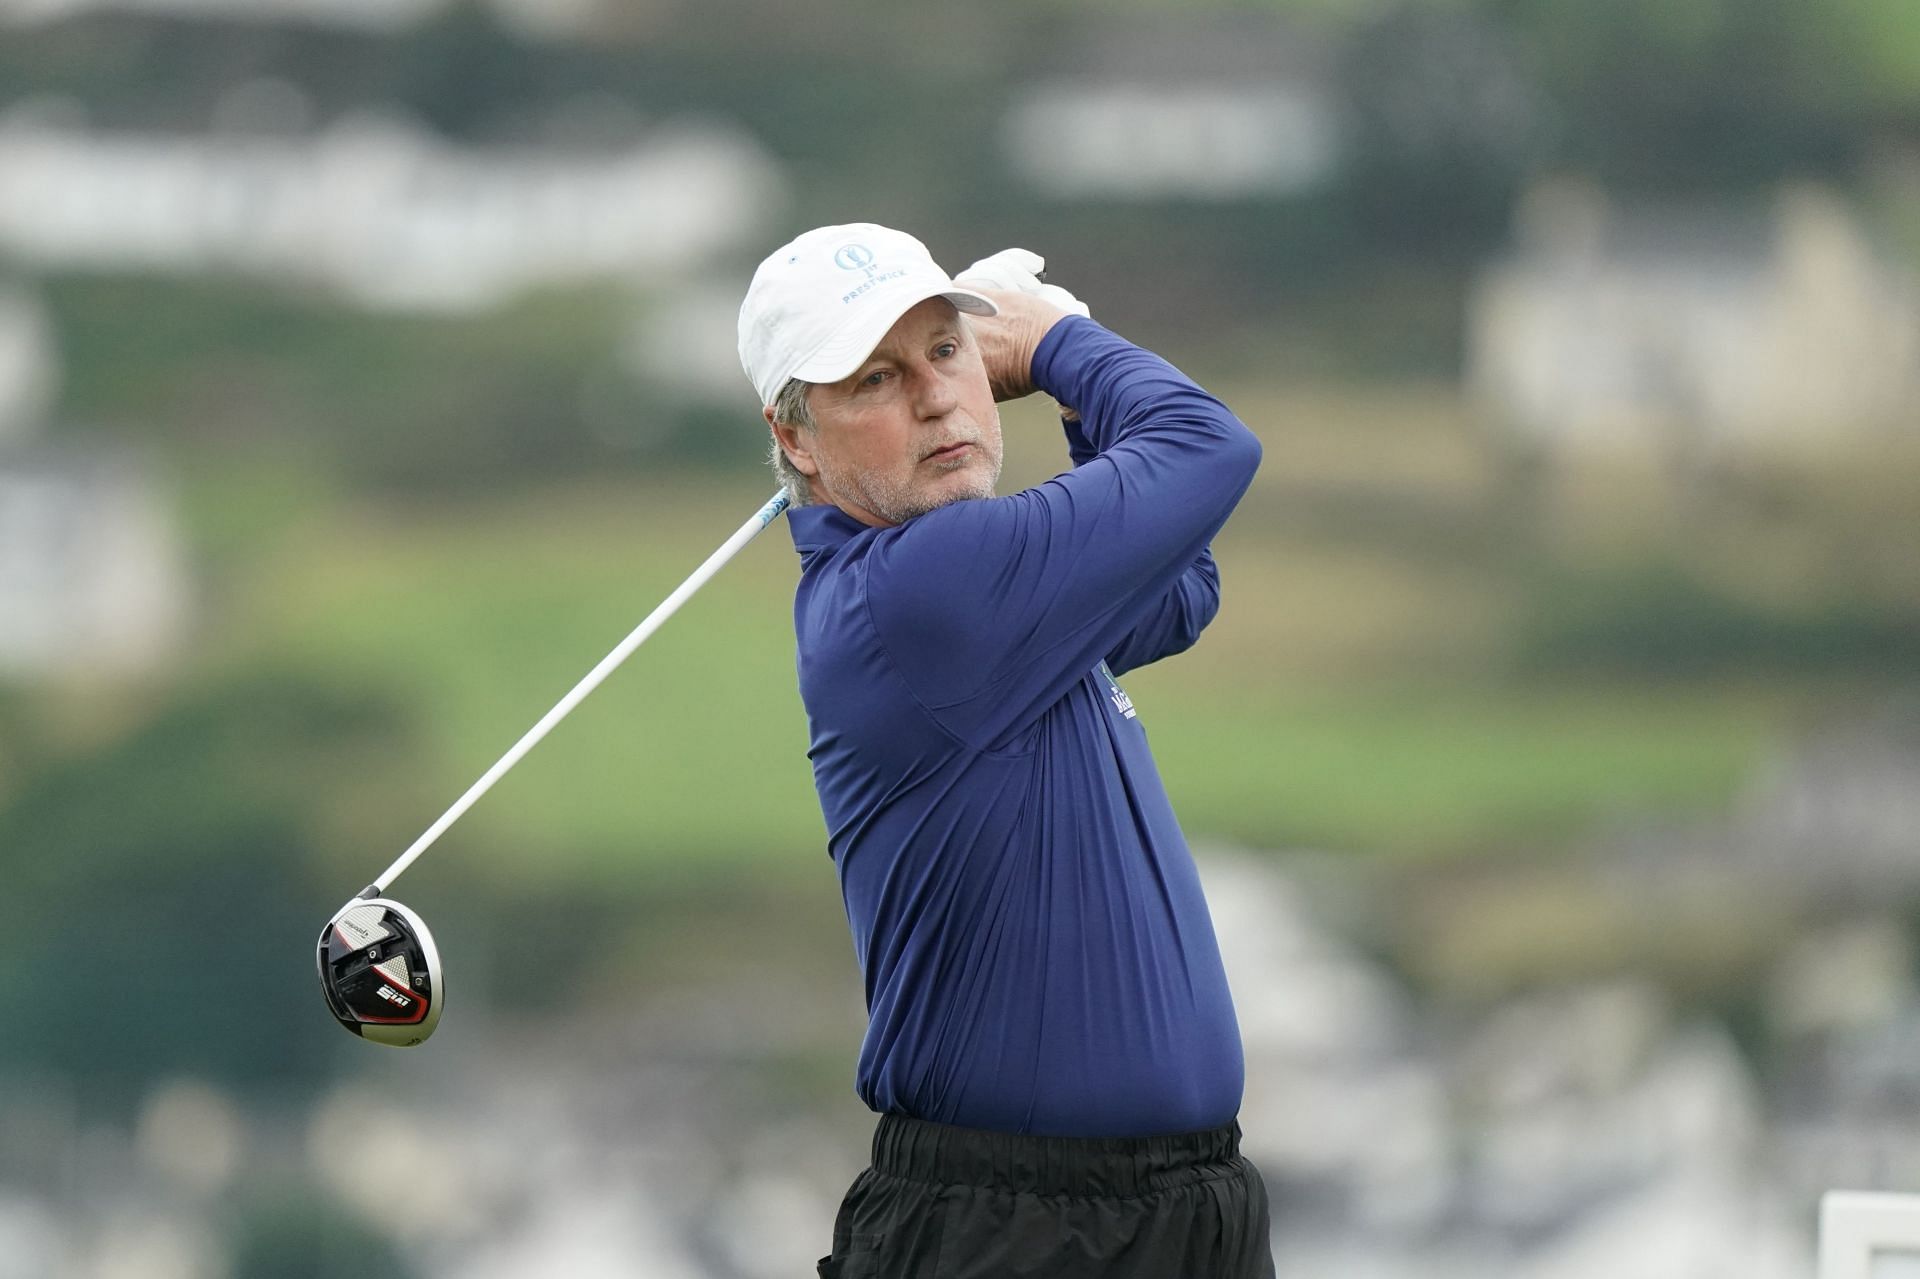 Irish Legends presented by McGinley Foundation - Day One